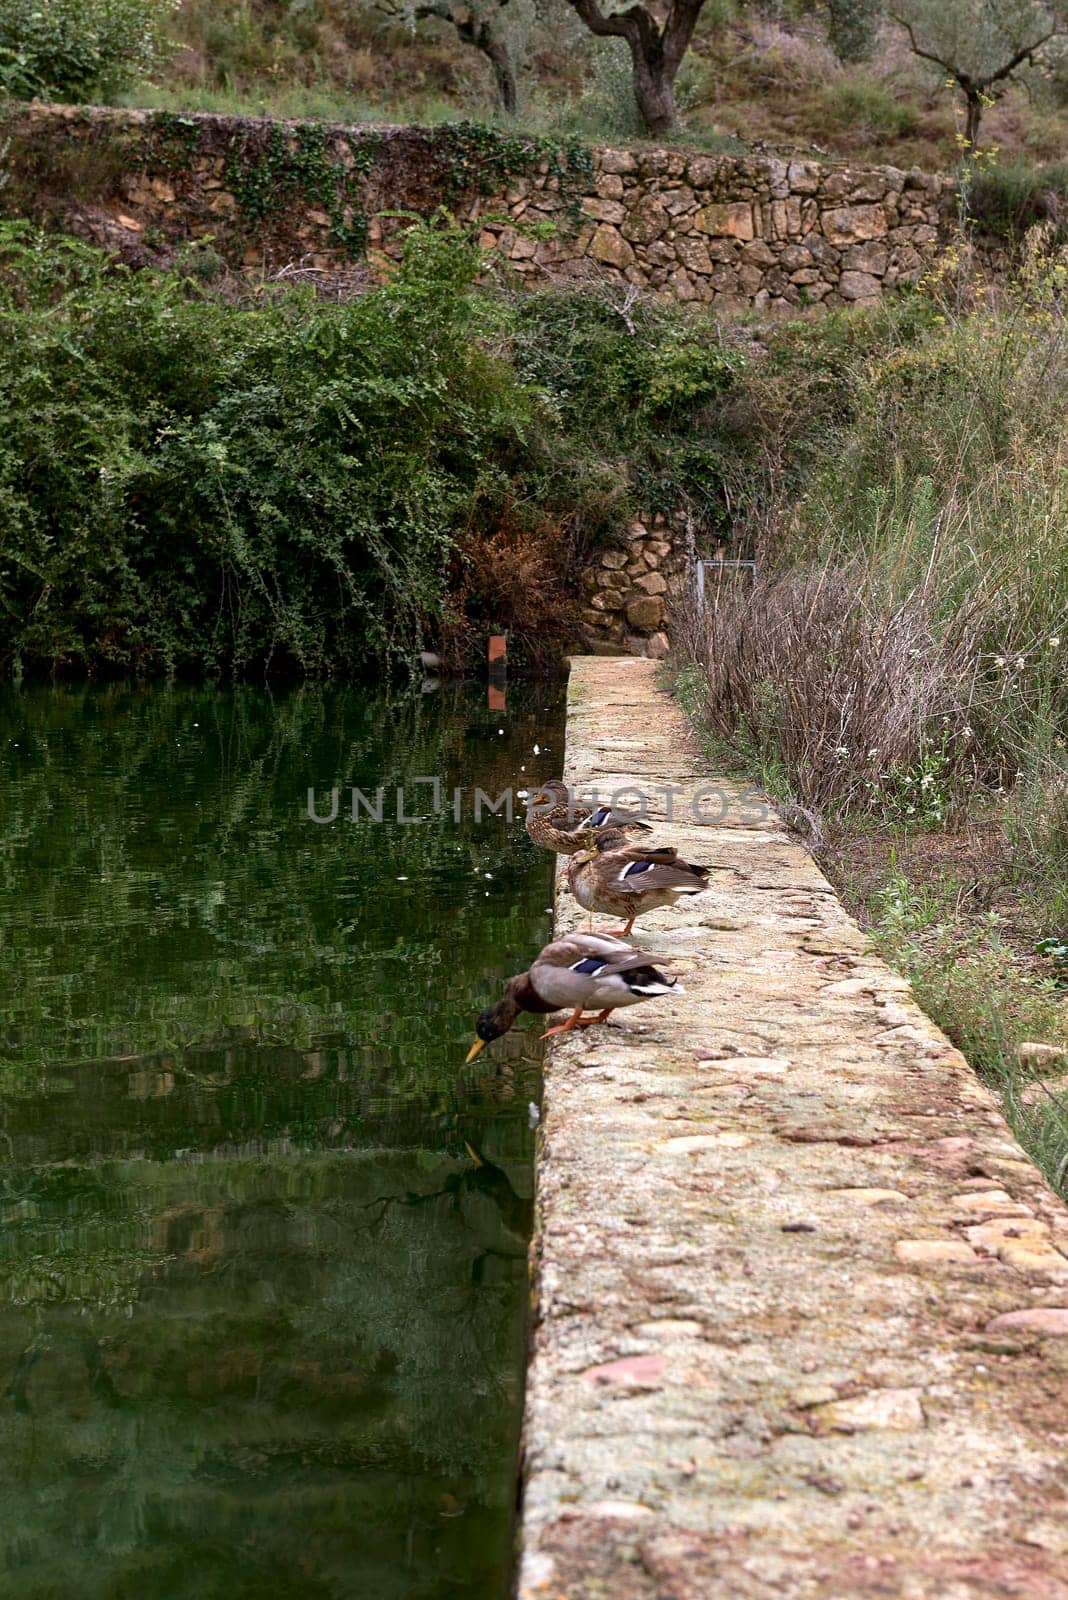 Group of three ducks on an irrigation pond, before going to the water.Transparent water, vegetation, empty space, ecosystem, traditional agriculture